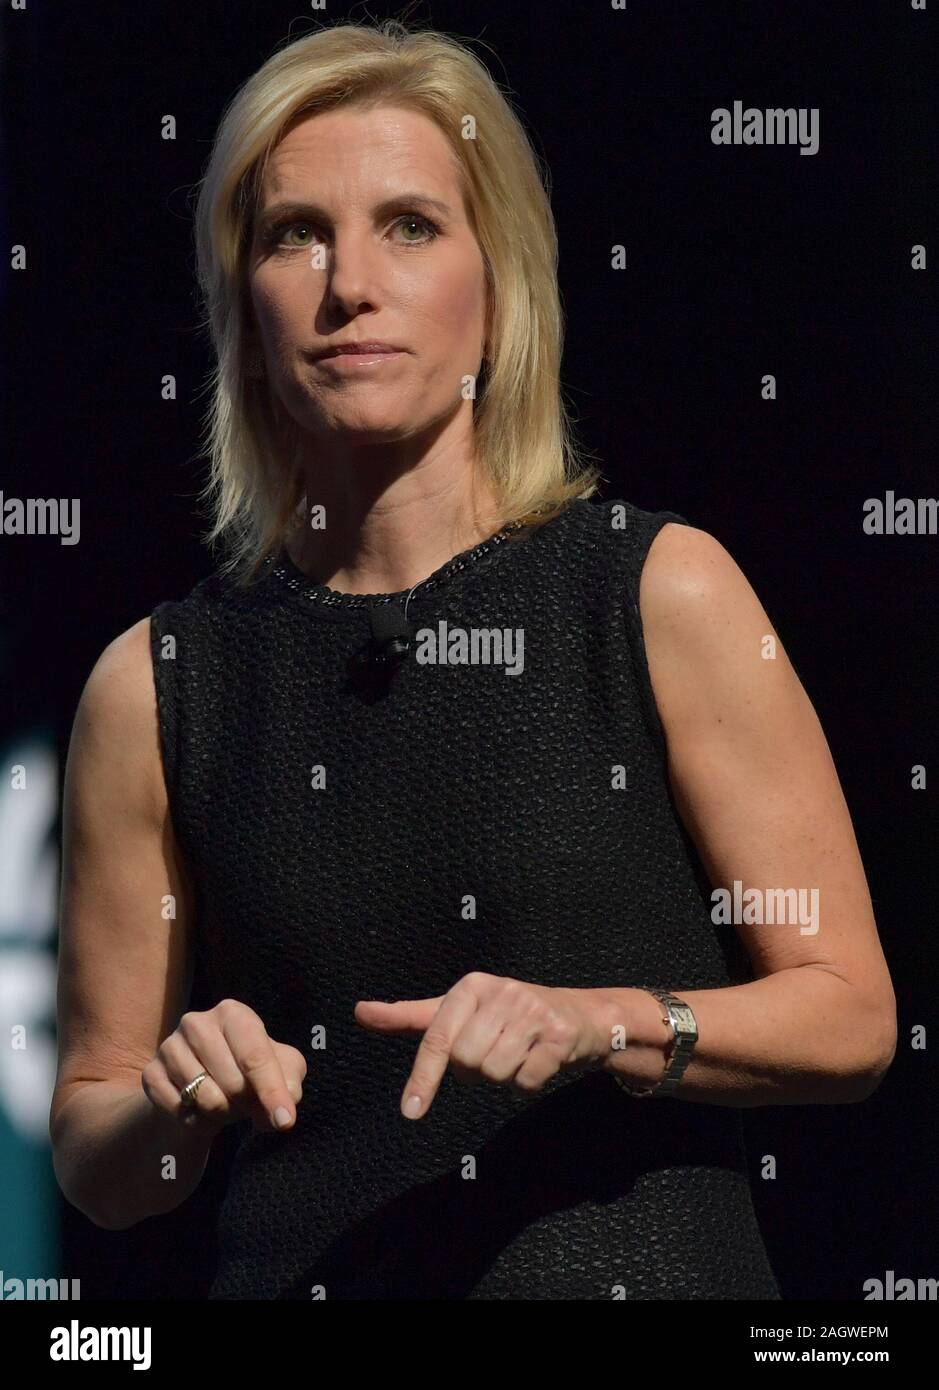 Florida, USA. 21 December 2019. Laura Ingraham speaks at the 2019 Turning Point USA Student Action Summit - Day 3 at the Palm Beach County Convention Center on December 20, 2019 in West Palm Beach, Florida. People: Laura Ingraham Credit: Storms Media Group/Alamy Live News Stock Photo